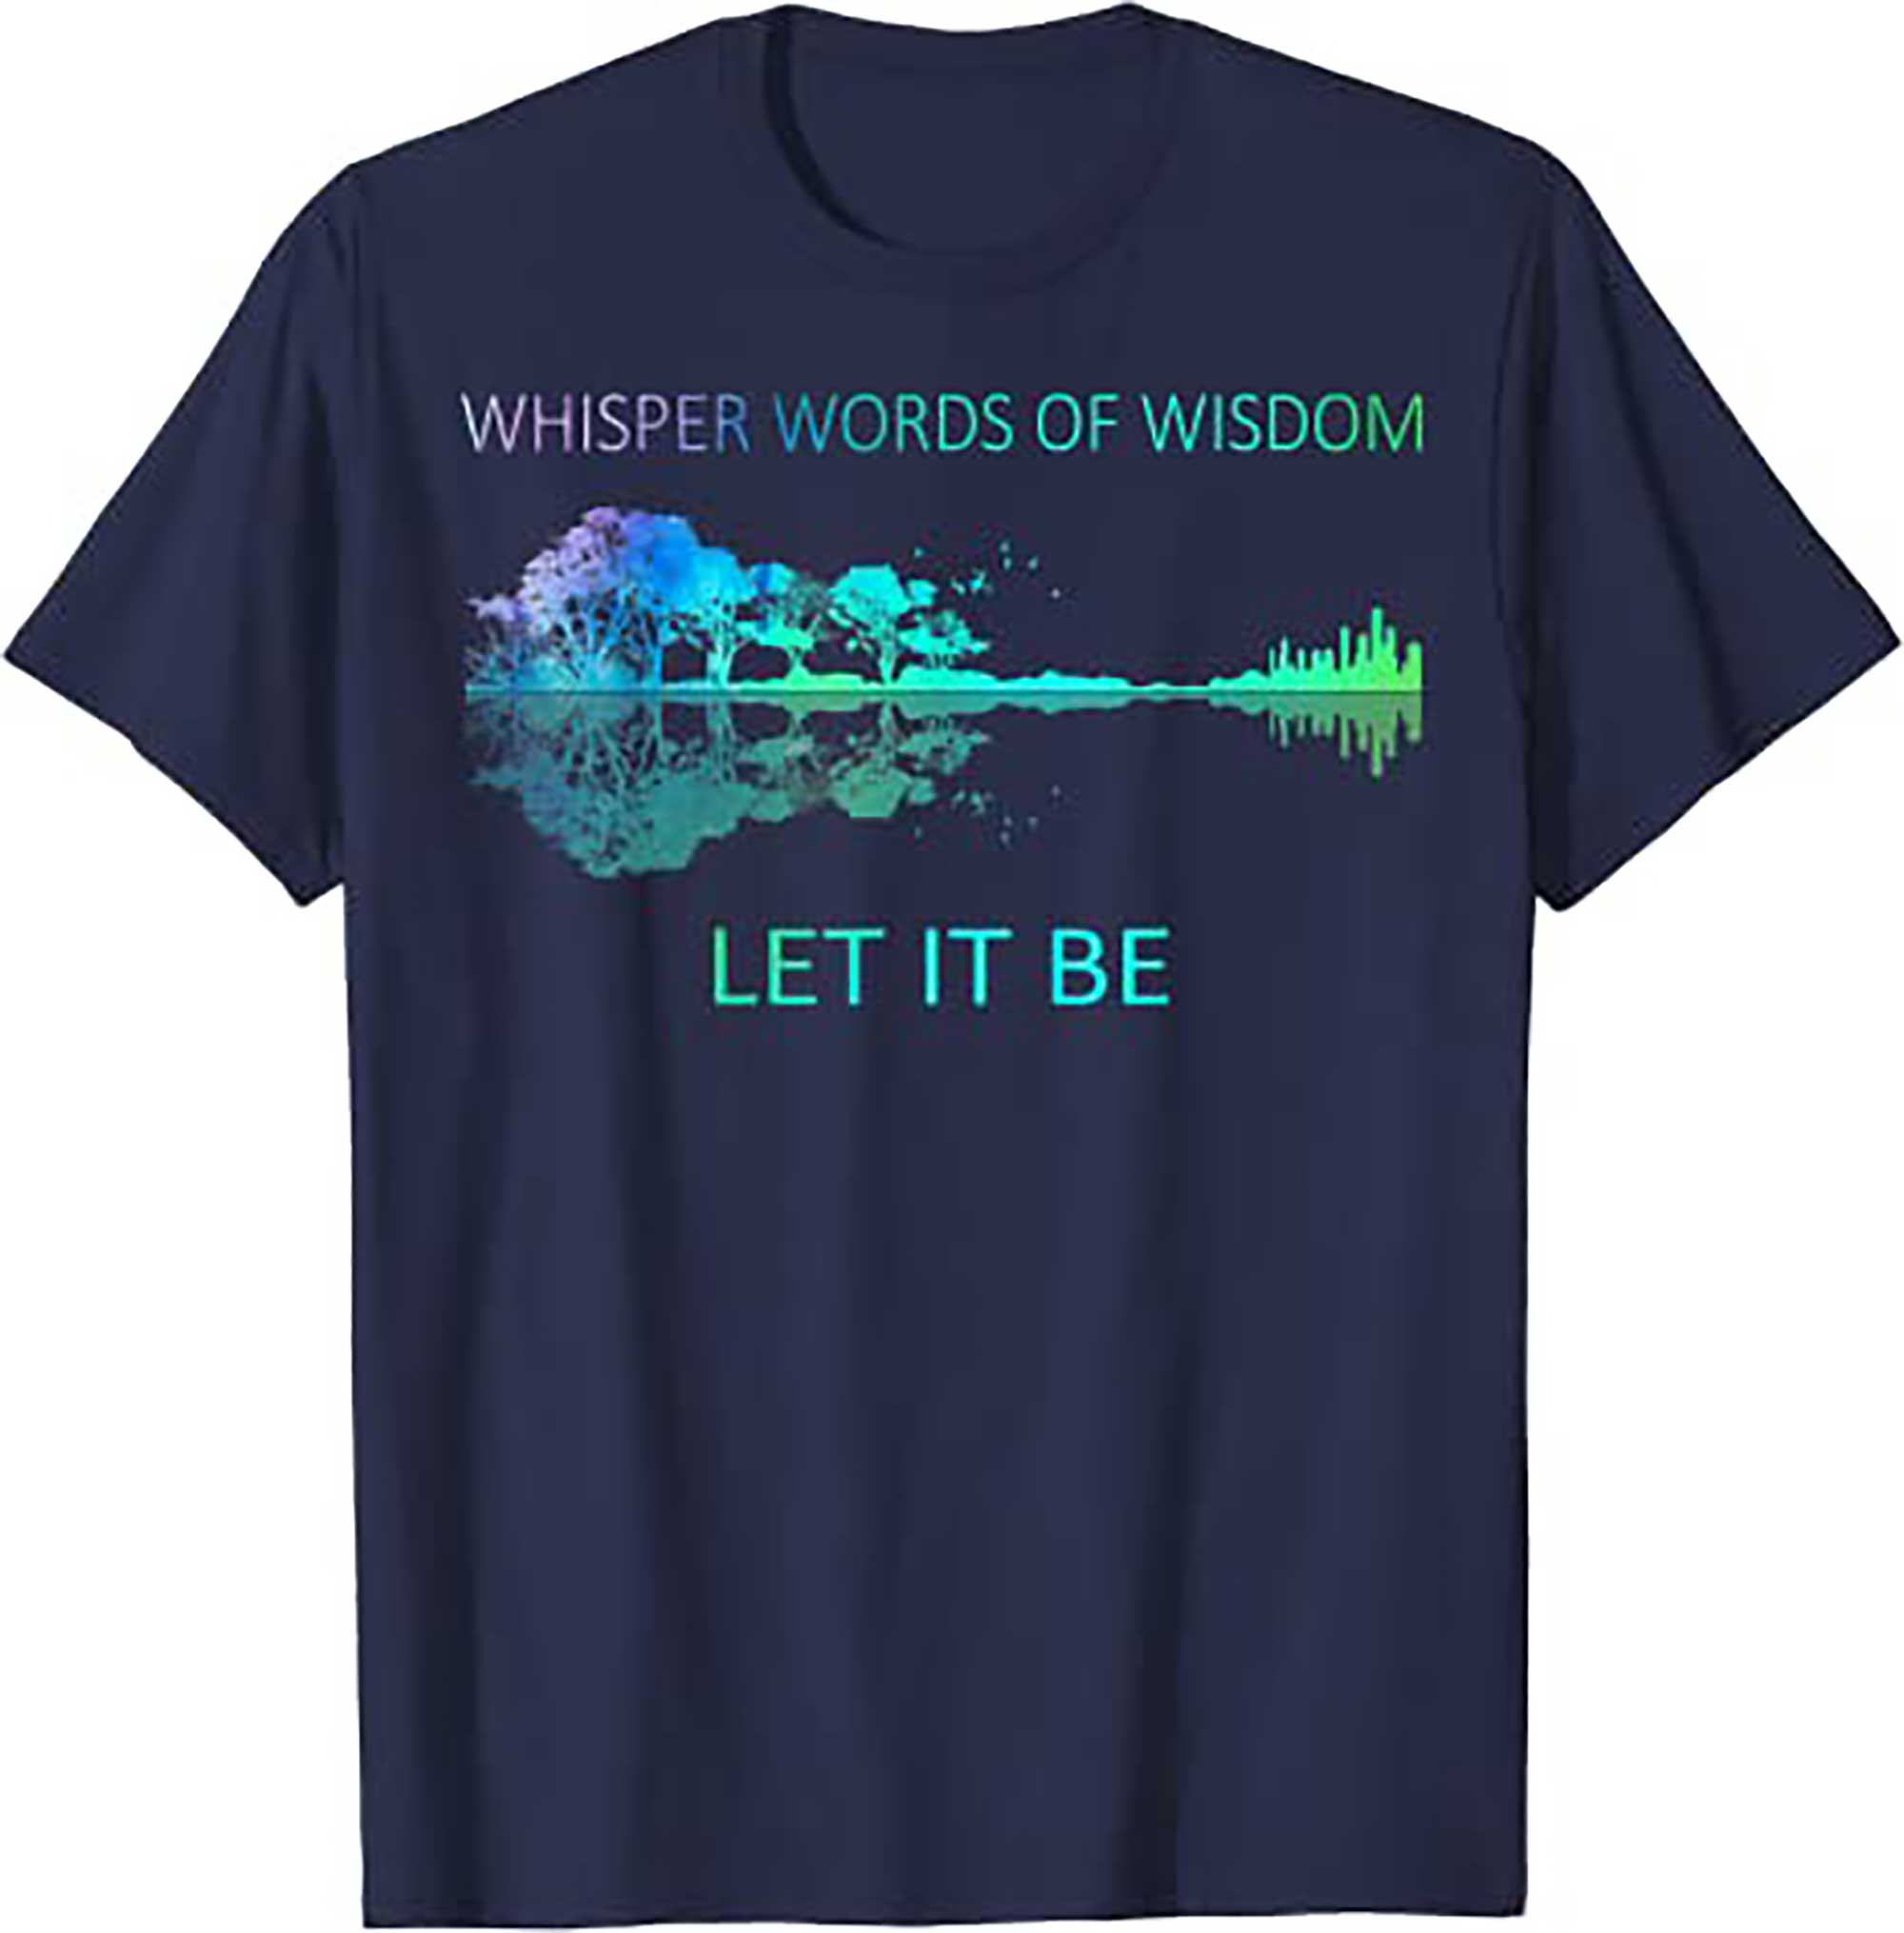 Skitongift Tree Sky There Will Be an Answer Let It Be Guitar T Shirt